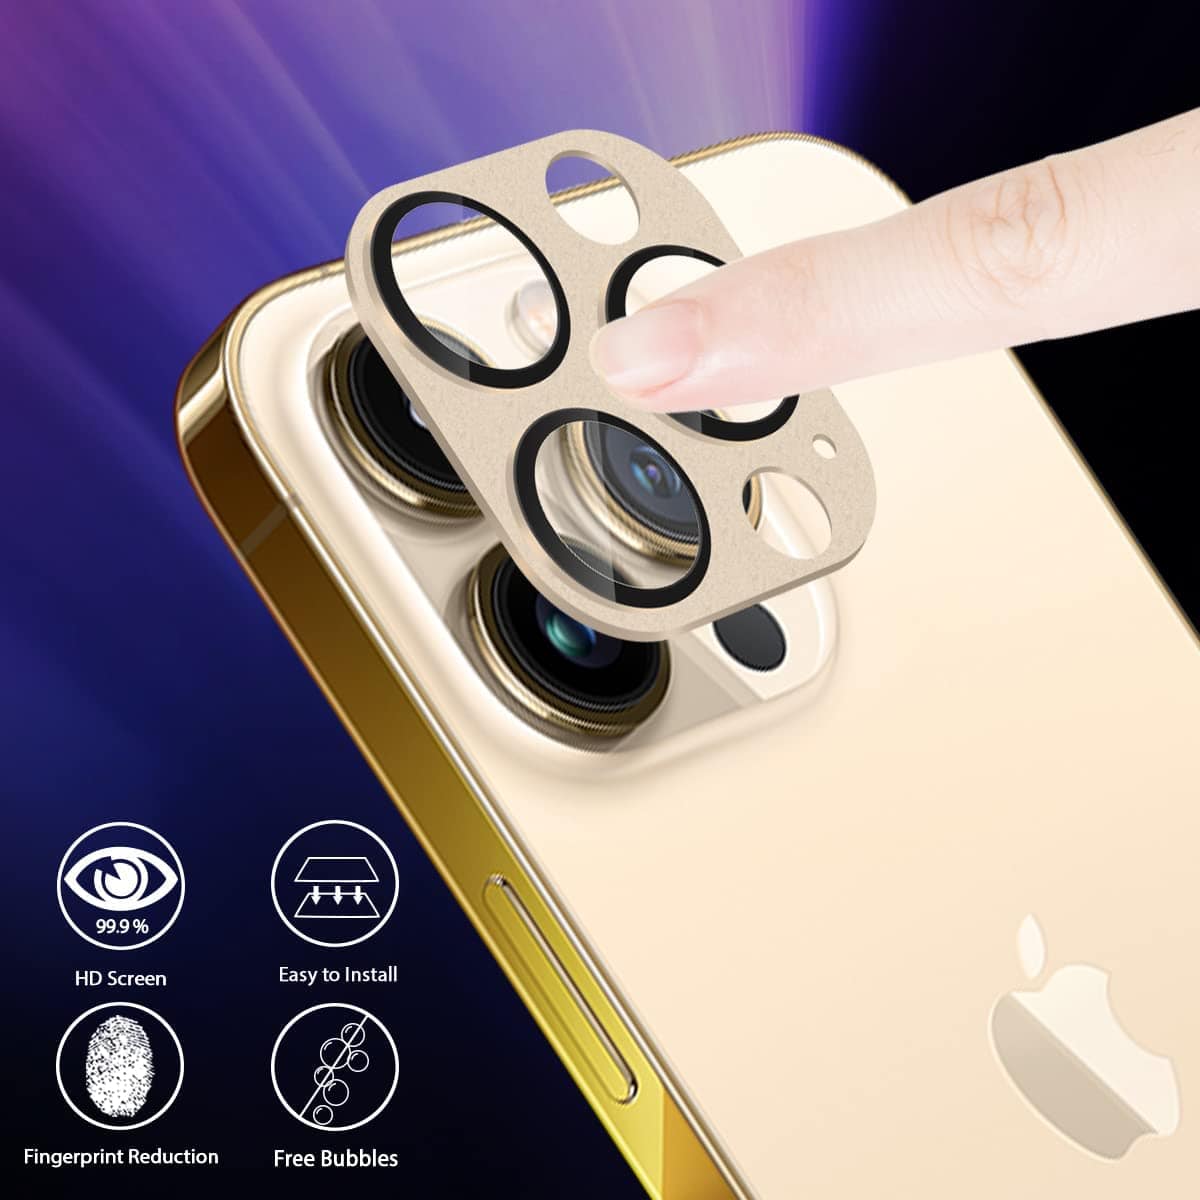 SaharaCase ZeroDamage Camera Lens Protector for Apple iPhone 13 Pro and iPhone 13 Pro Max White